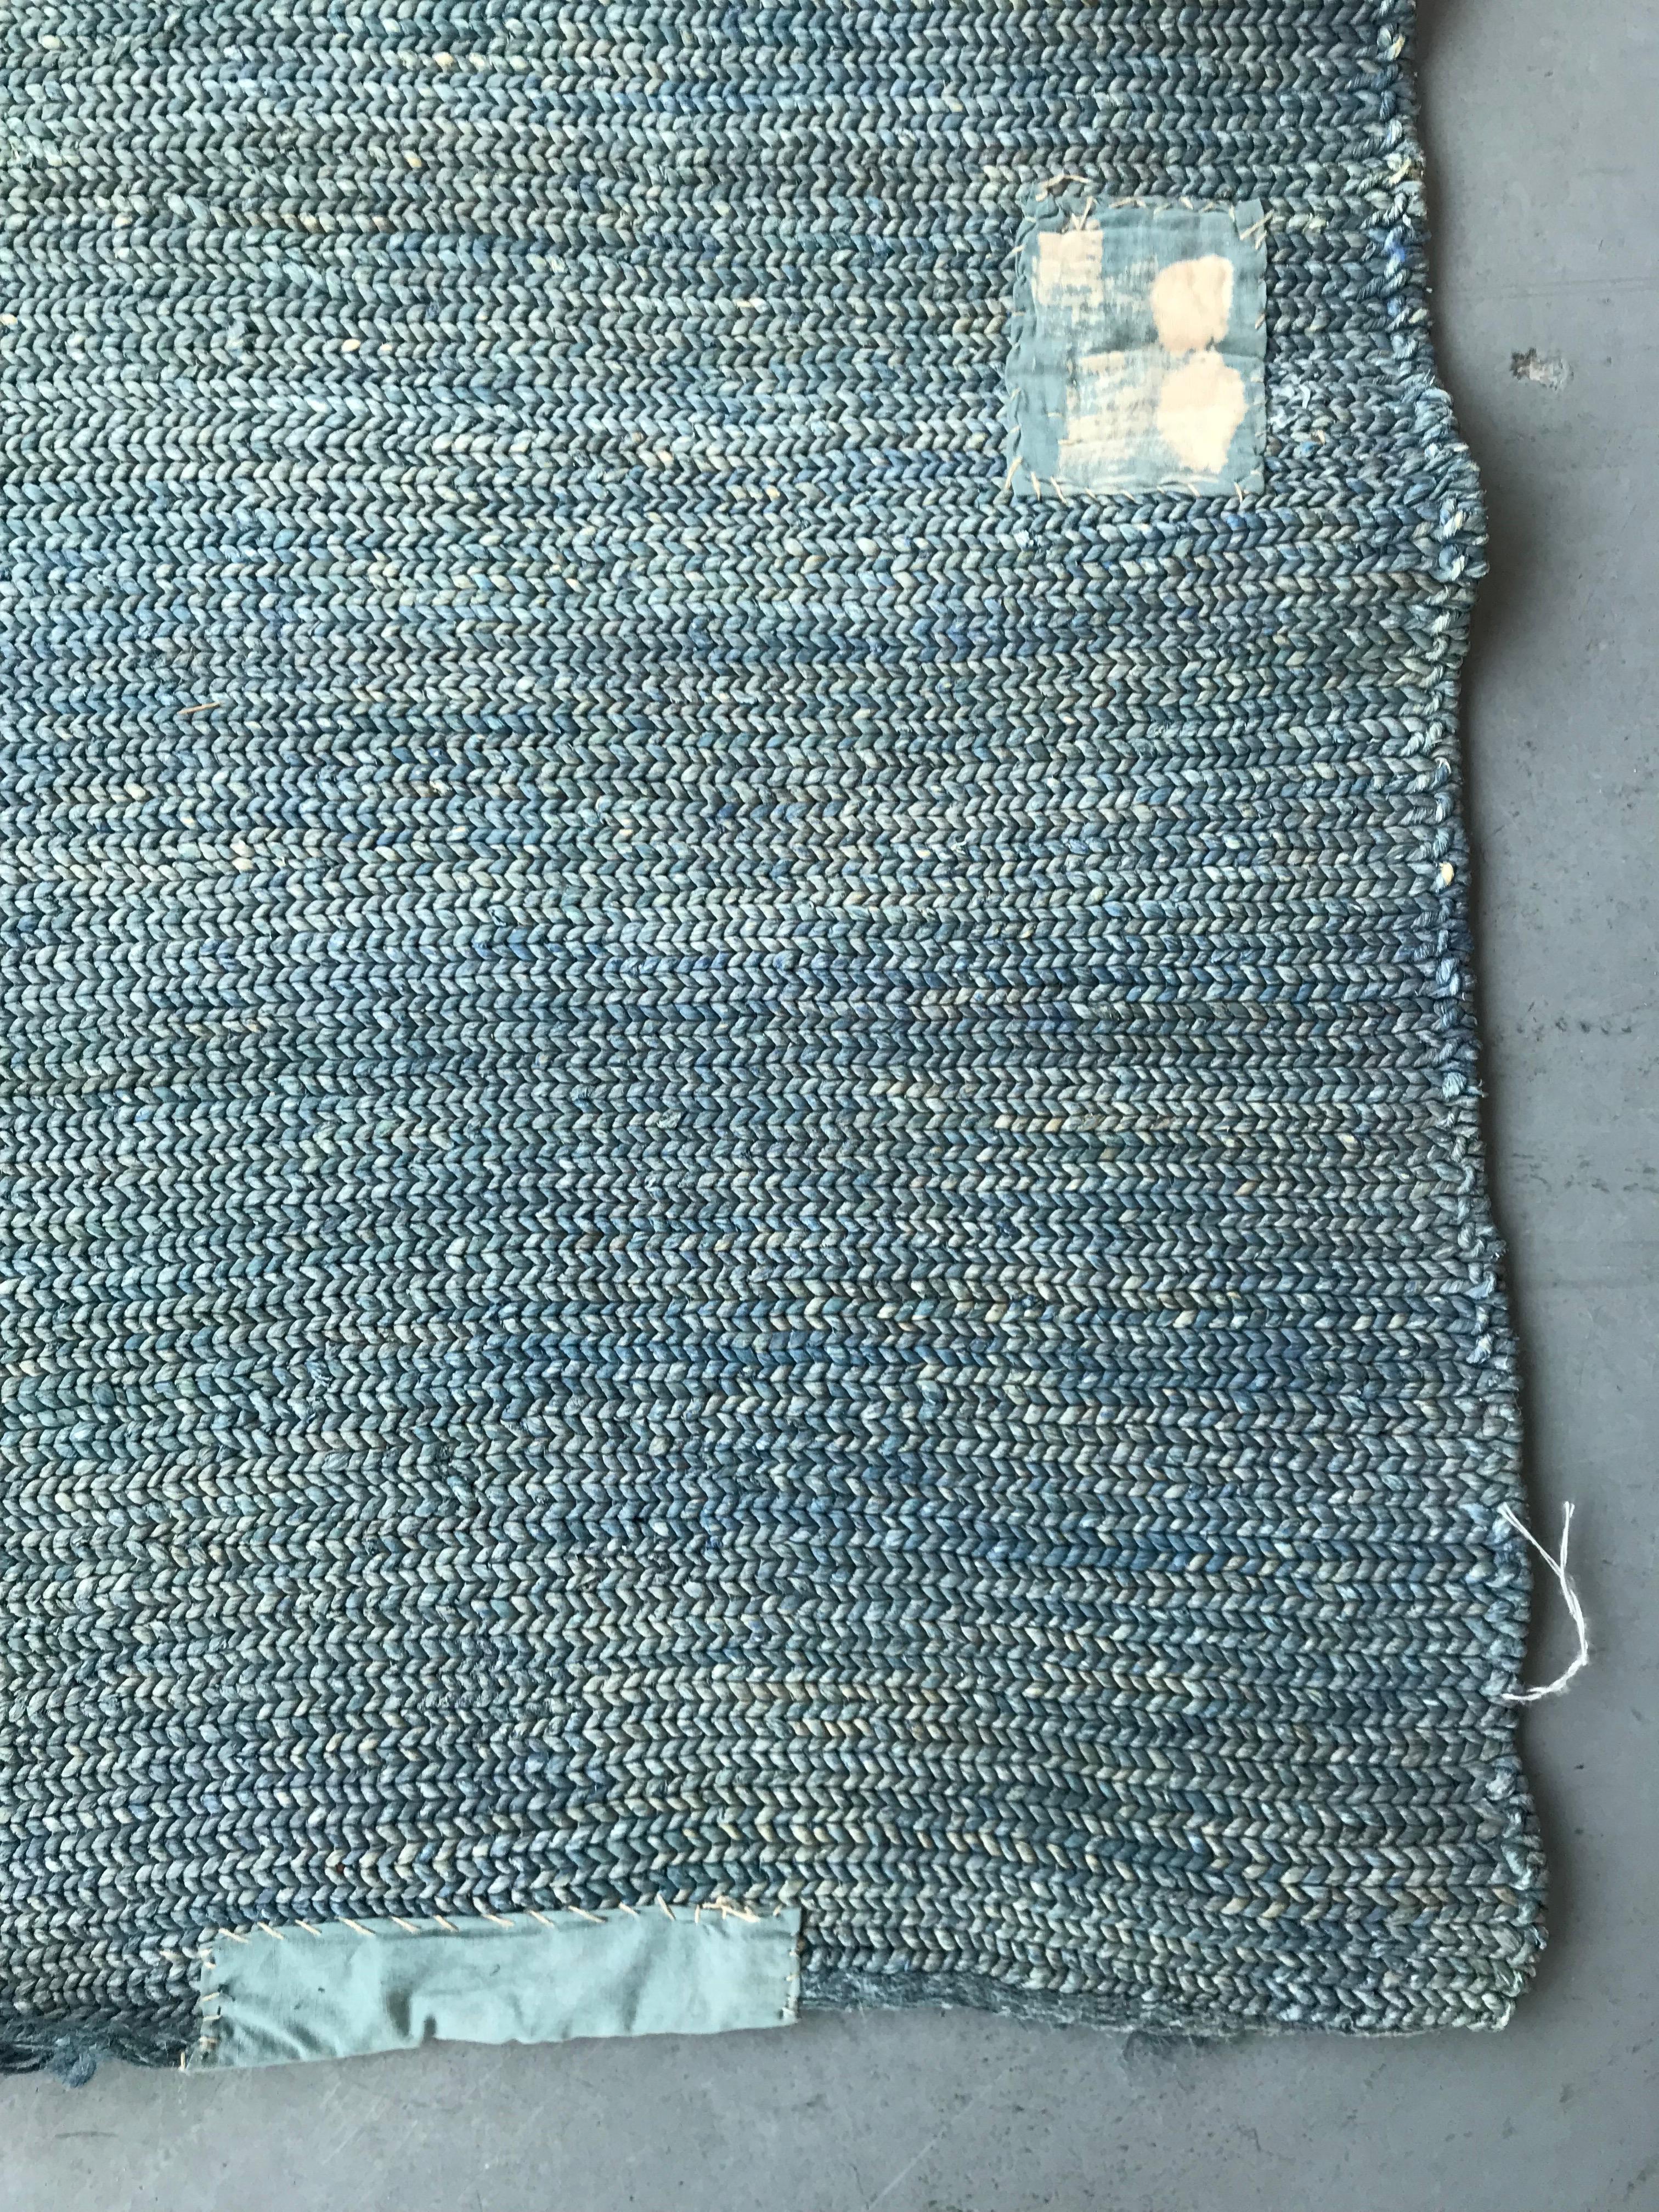 Woven 20th Century Turkish Muted Blue Cotton and Linen Rug